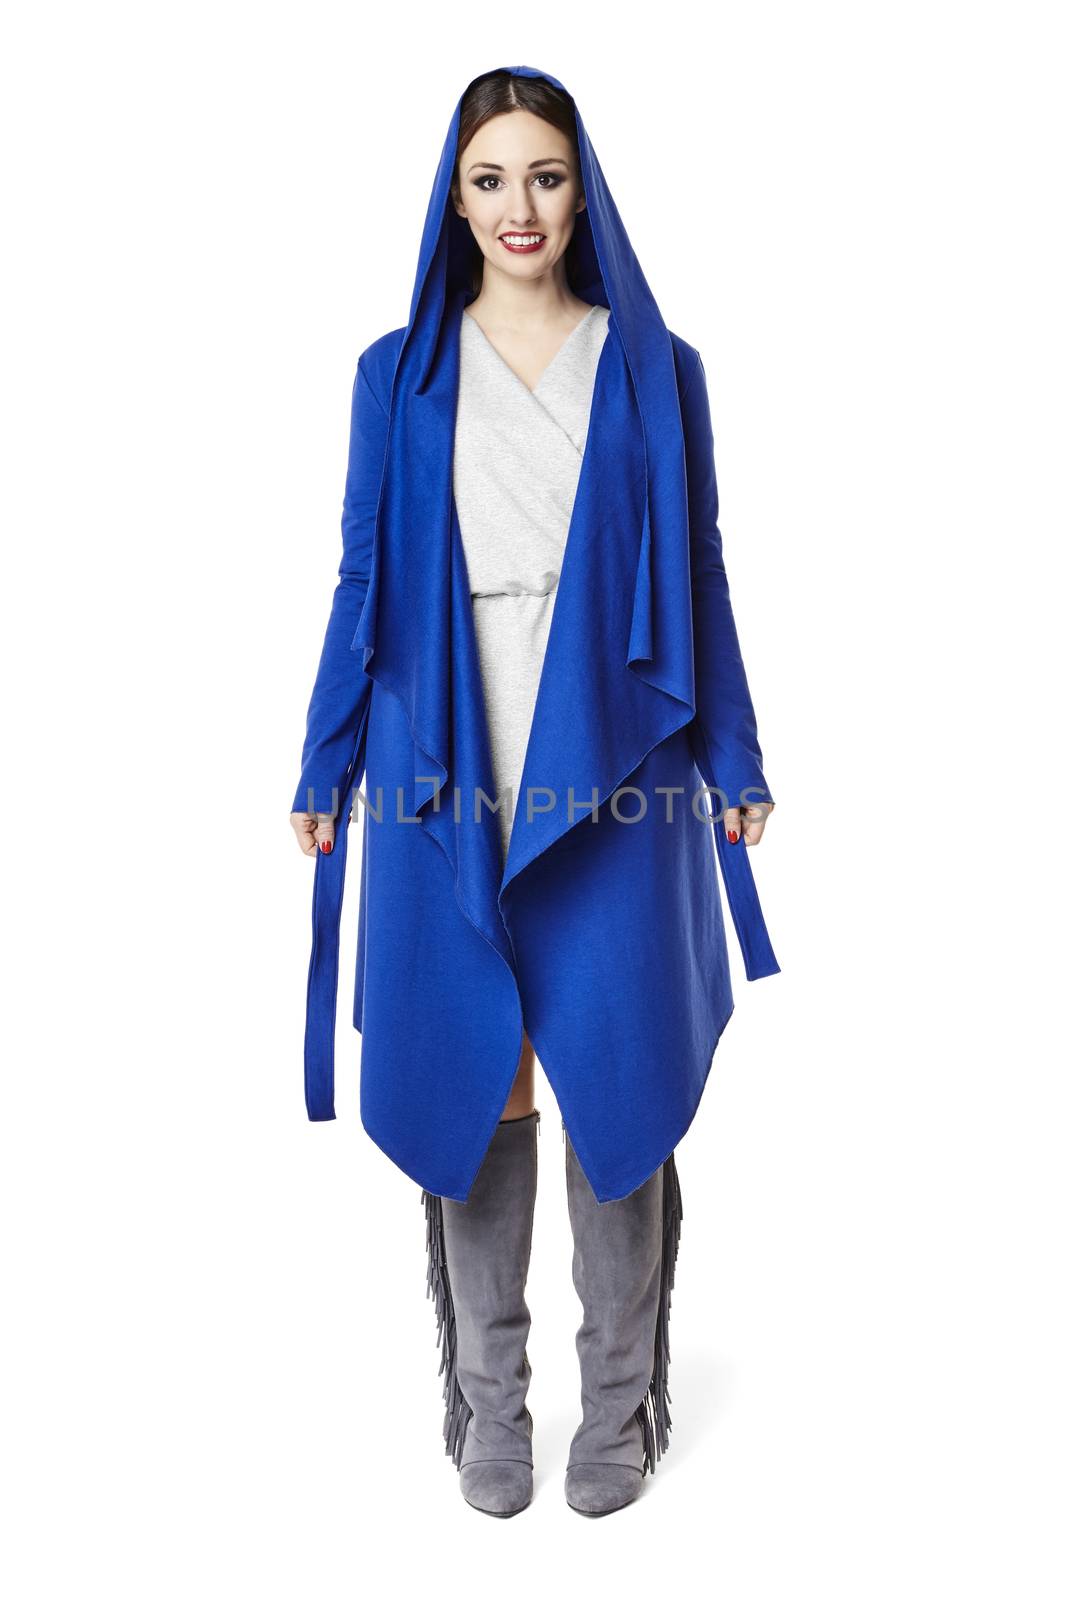 Studio shot of woman in blue coat. Isolated on white background.